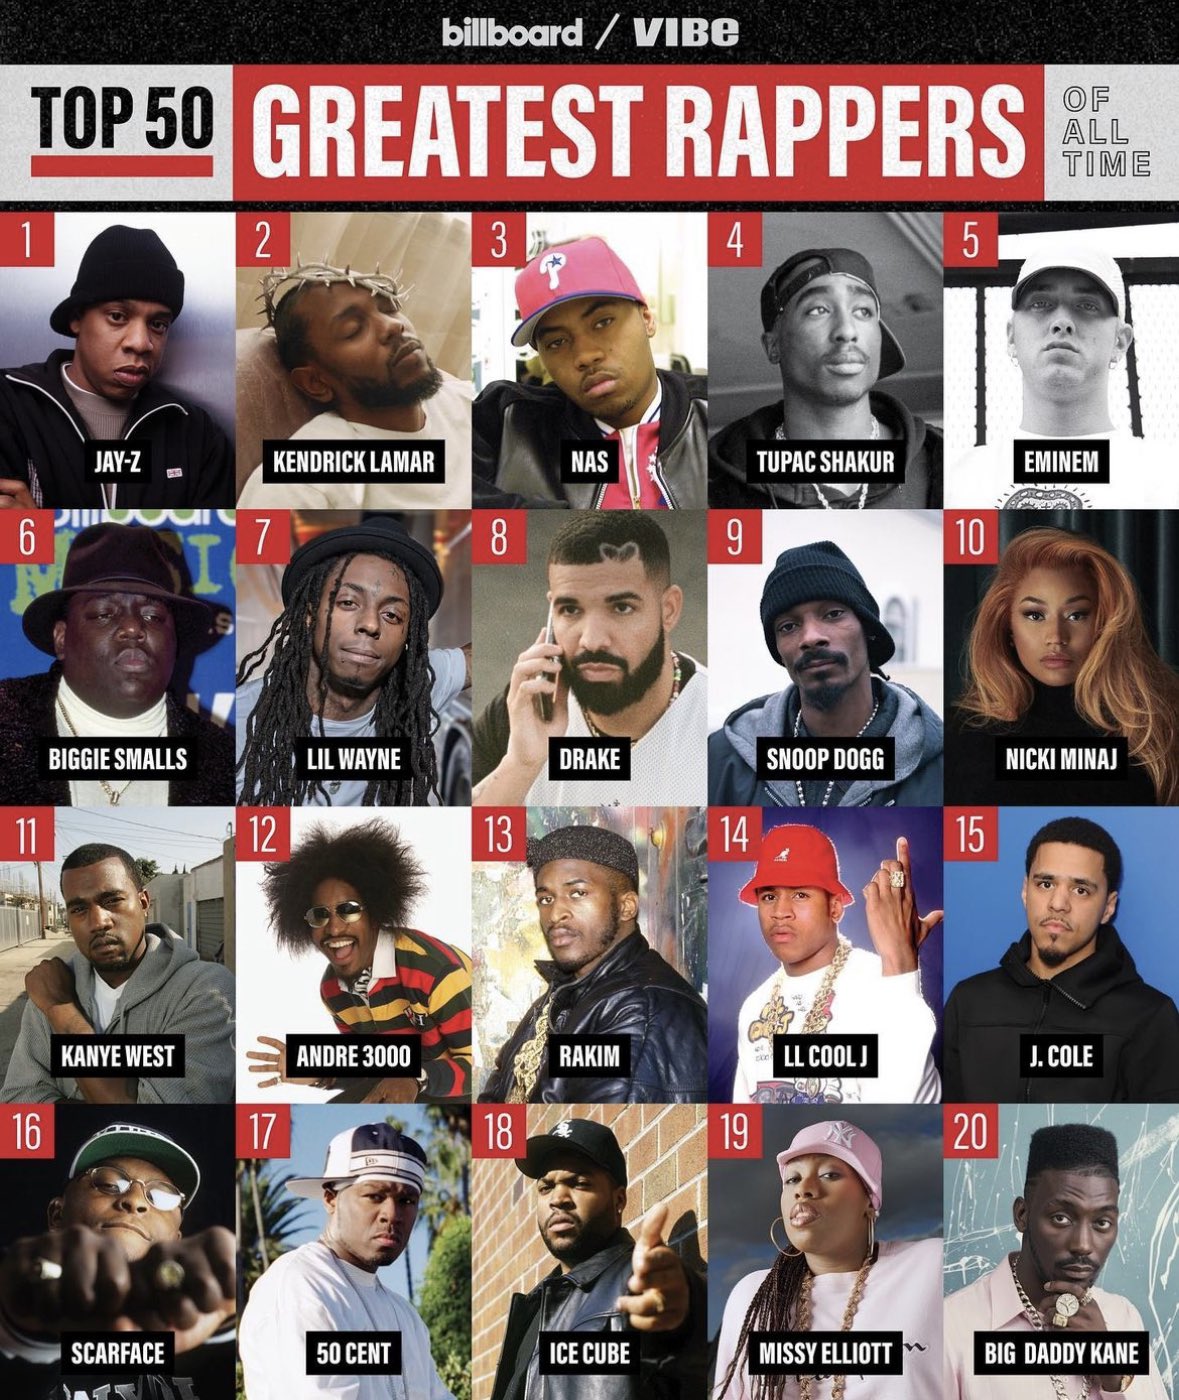 Indgang golf Advent Rap Alert on Twitter: "Billboard/Vibe's Top 20 Greatest Rappers of All  Time: https://t.co/54NpUazr05" / Twitter